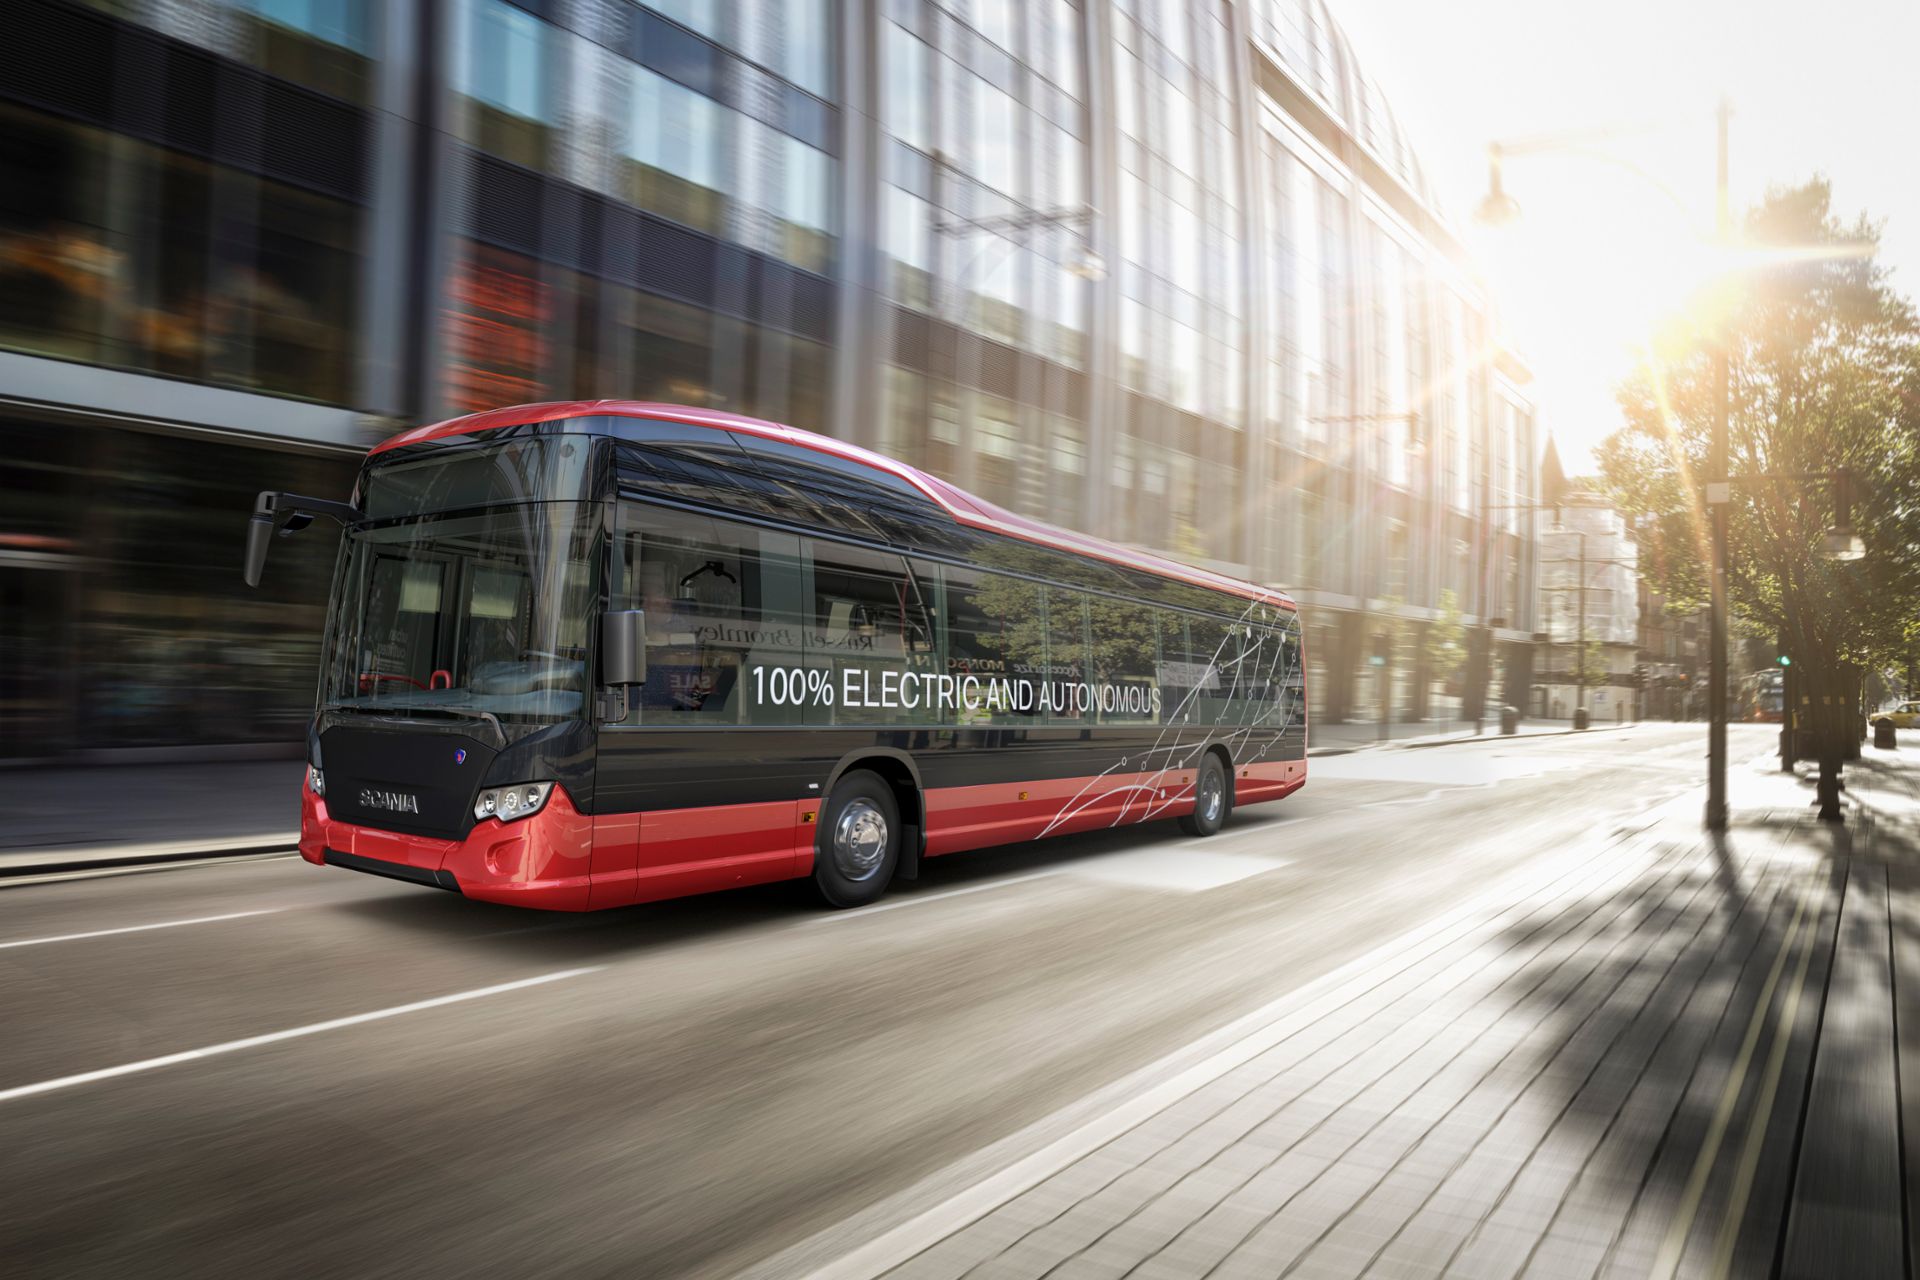 Scania is working on electric and autonomous buses